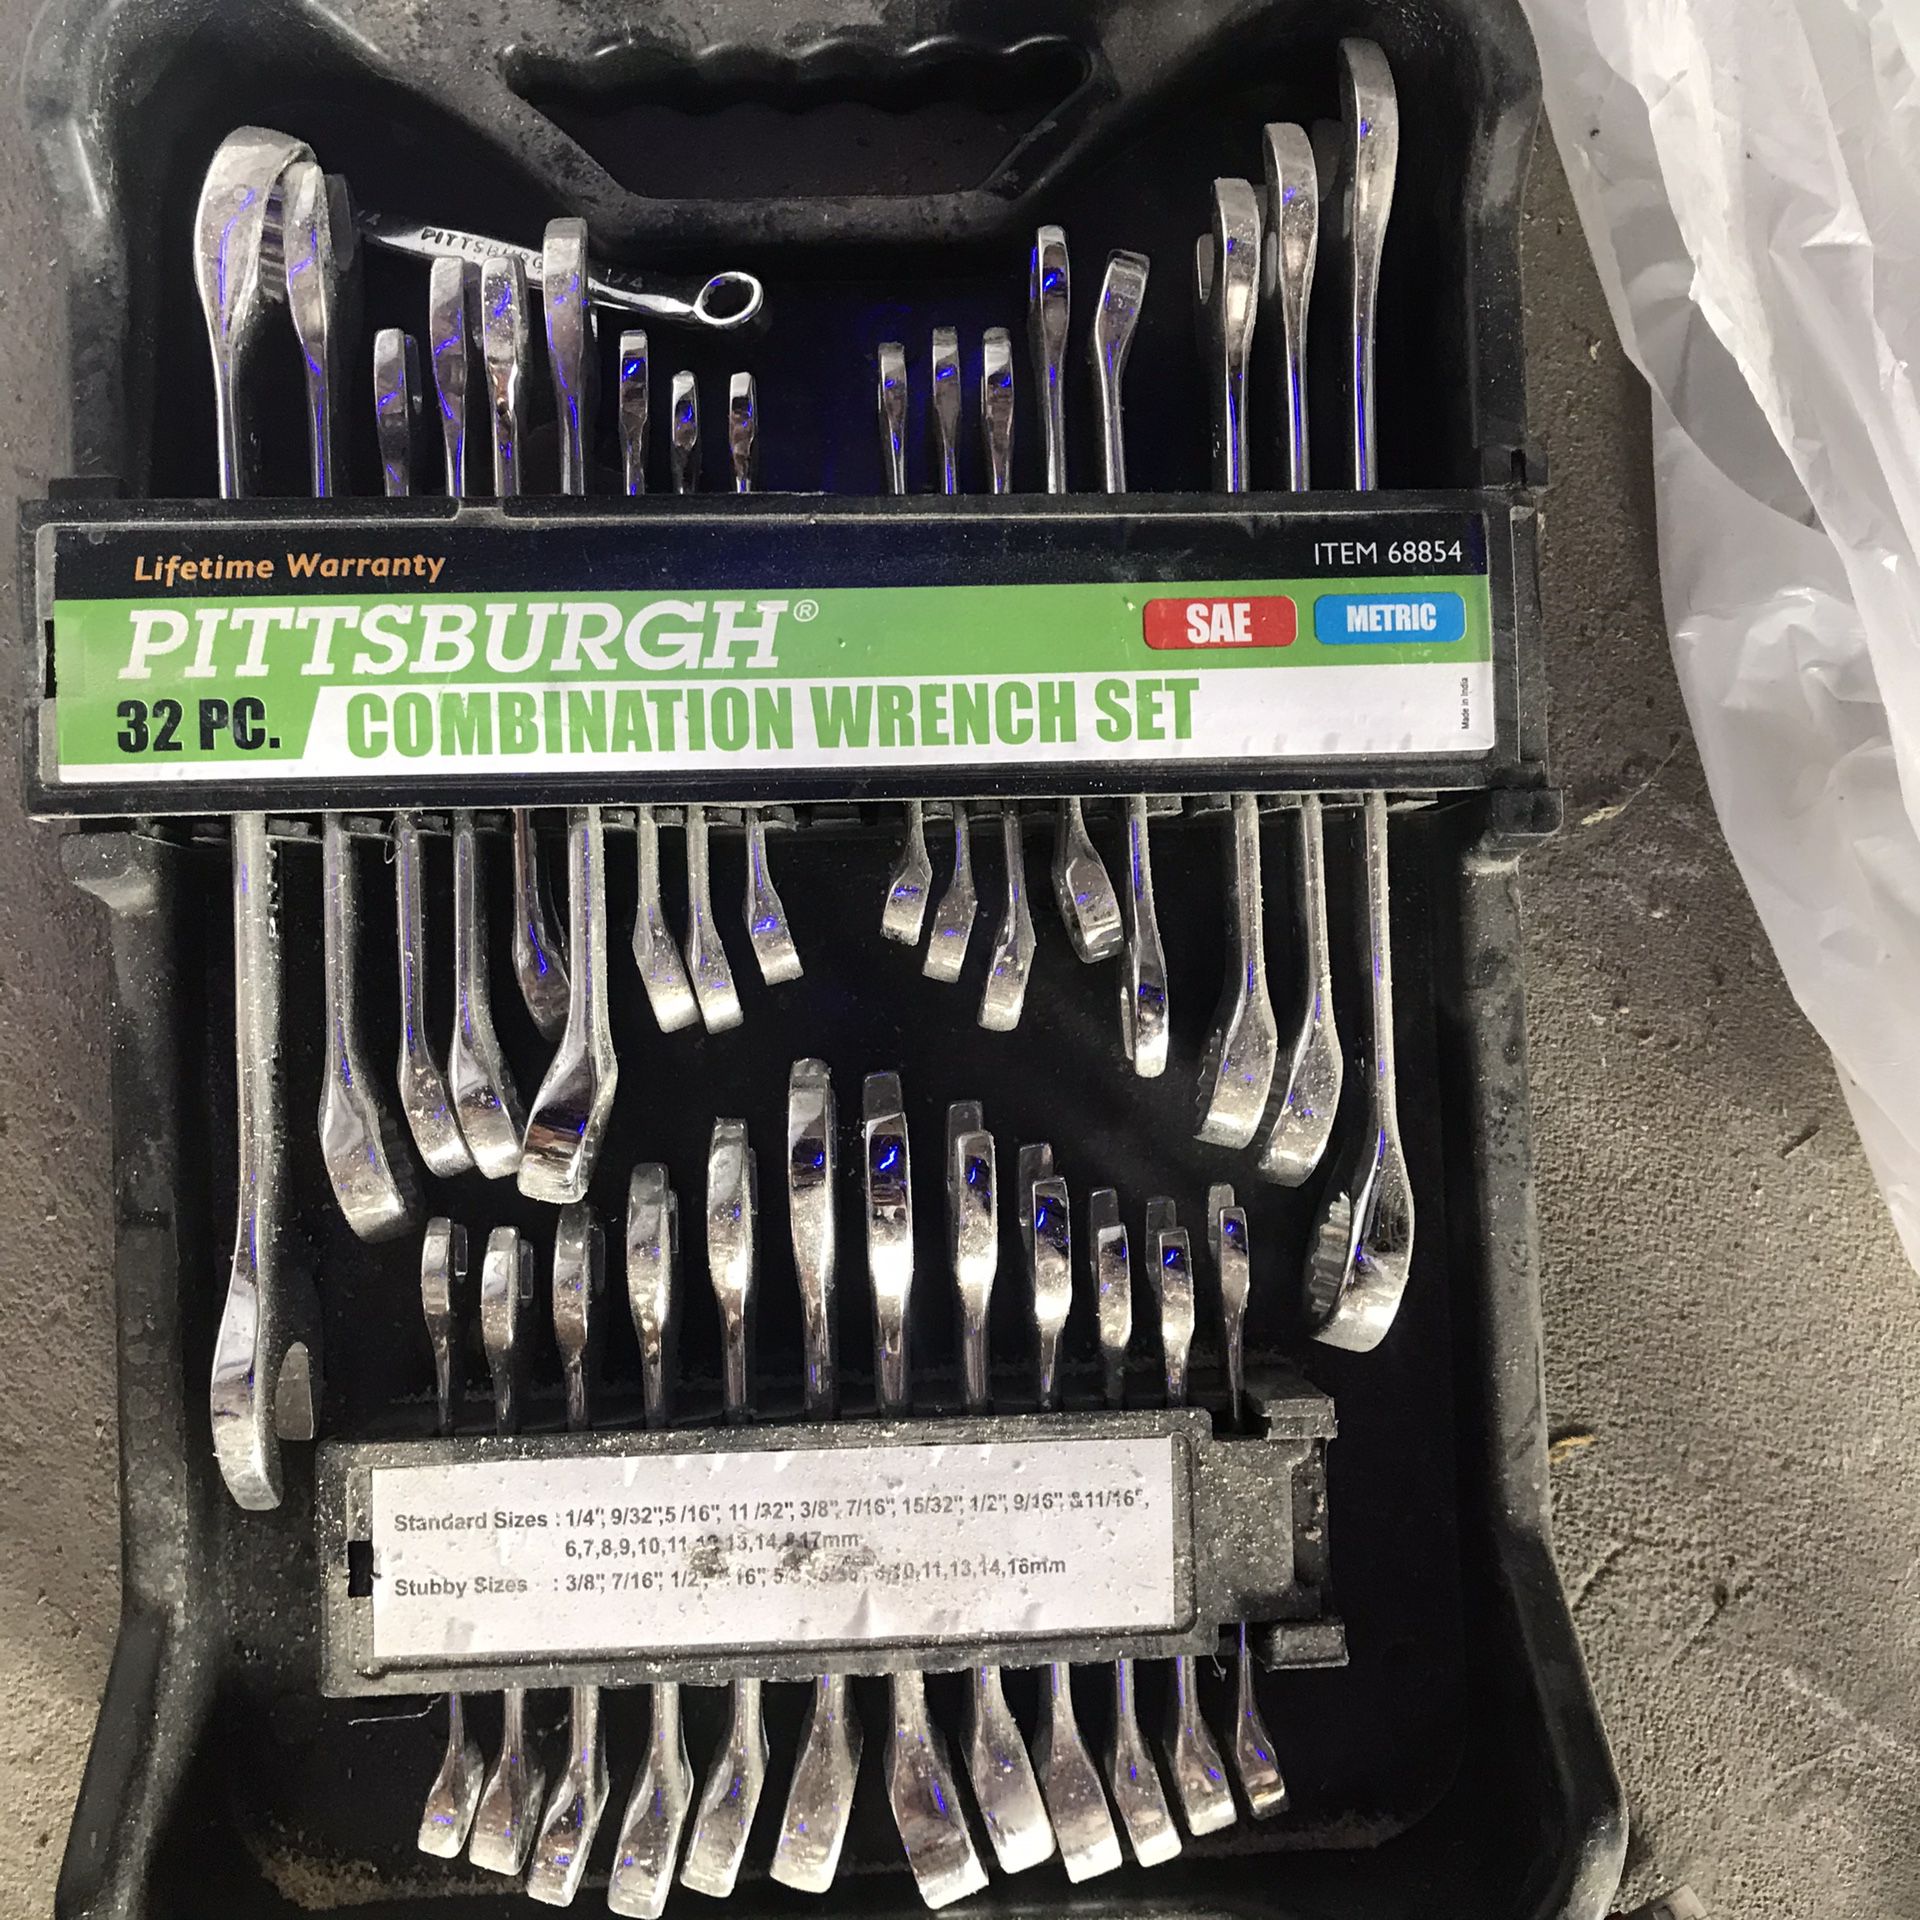 Pittsburgh combination wrench set